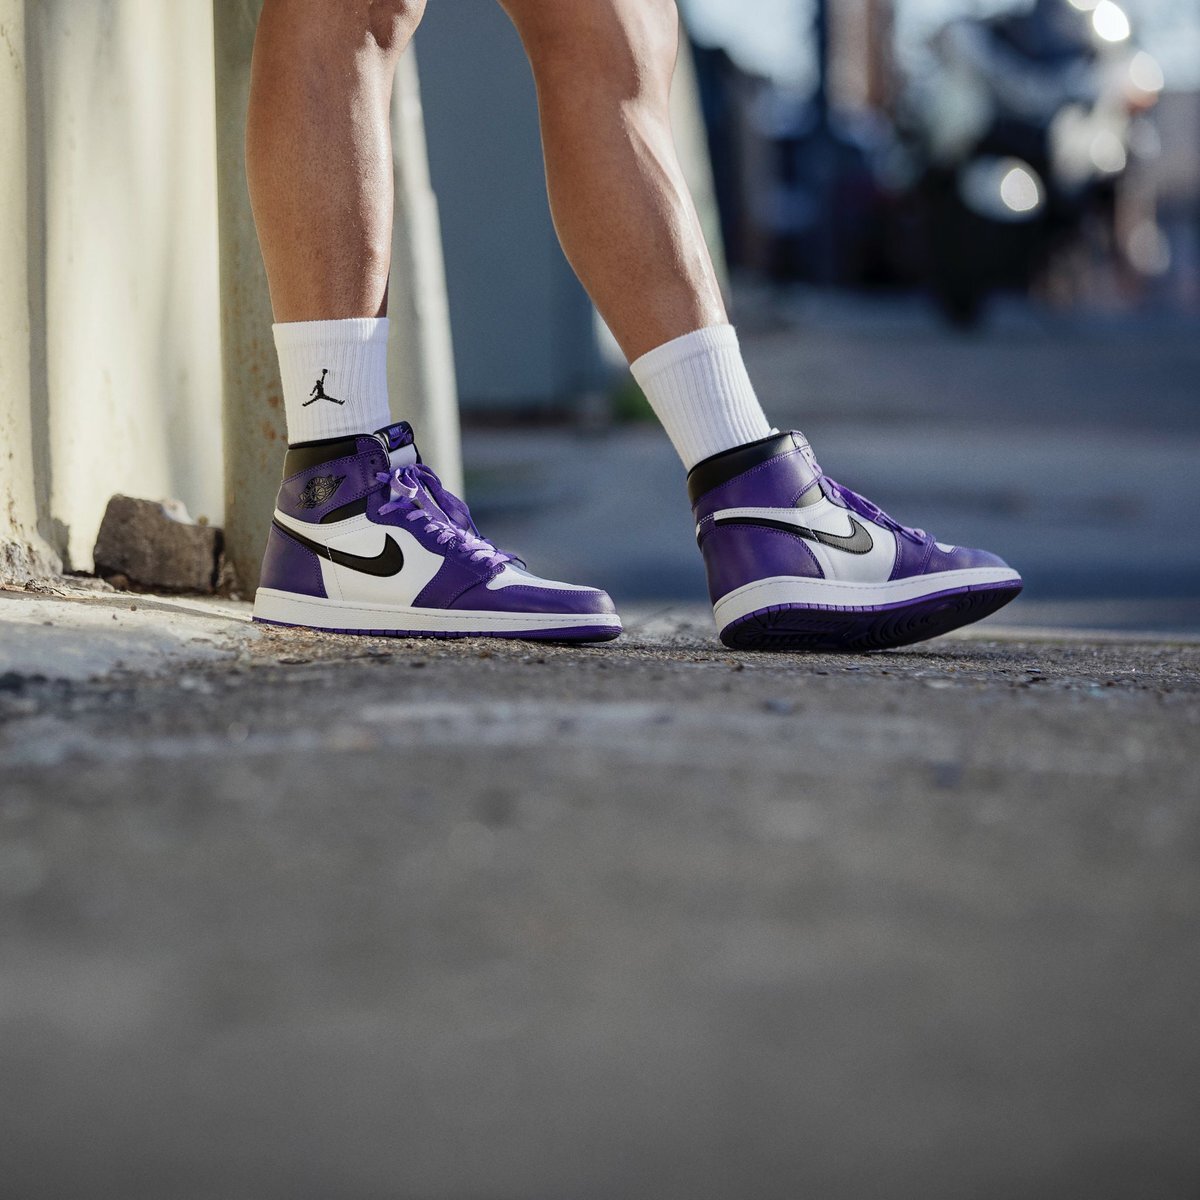 how to wear air jordan 1 mid with shorts